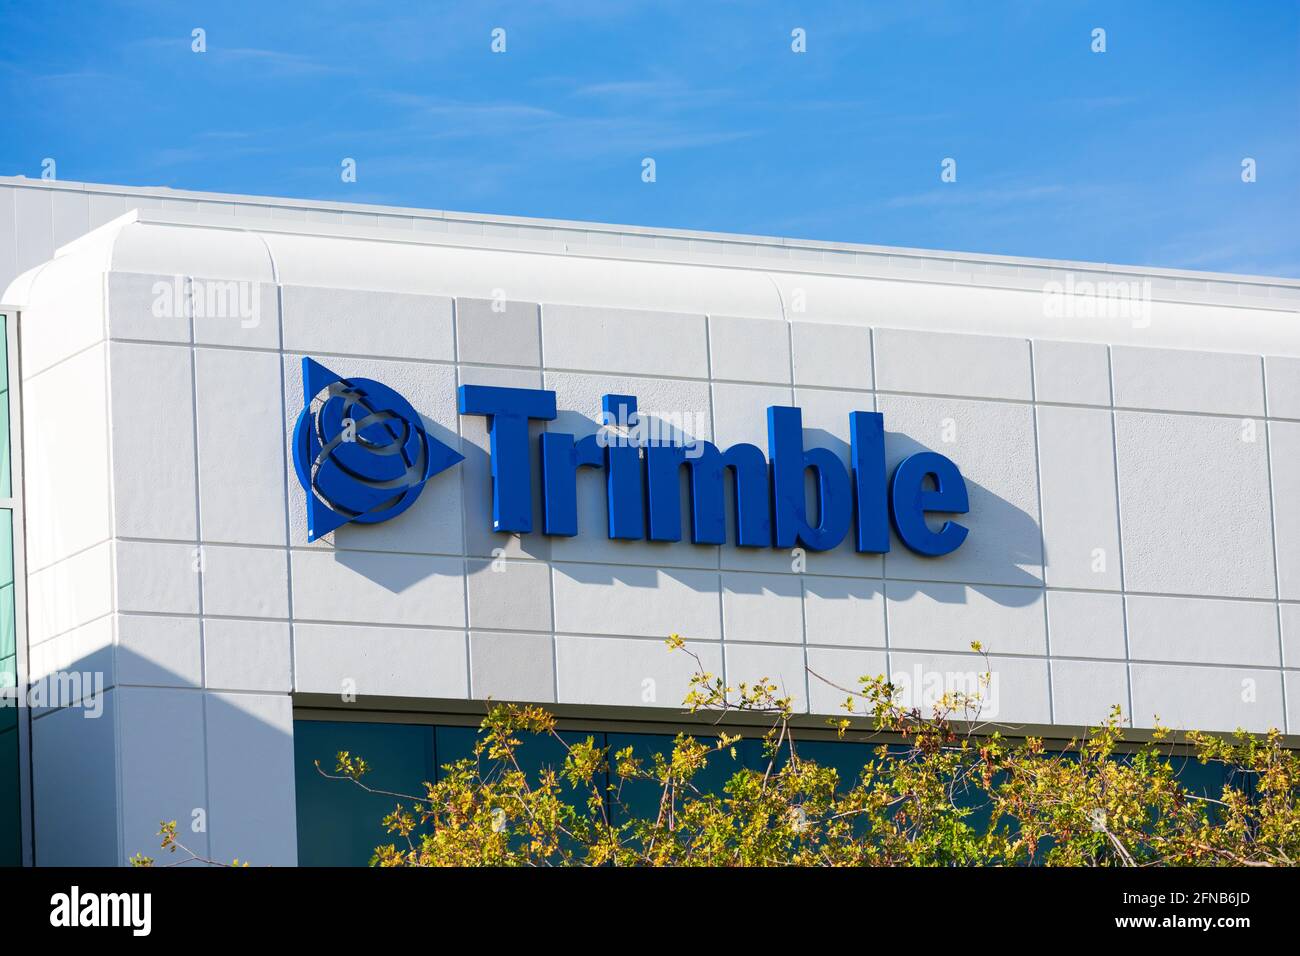 Trimble Inc. headquarters exterior. Trimble develops positioning technology solutions for surveying, construction, agriculture, public safety and mapp Stock Photo